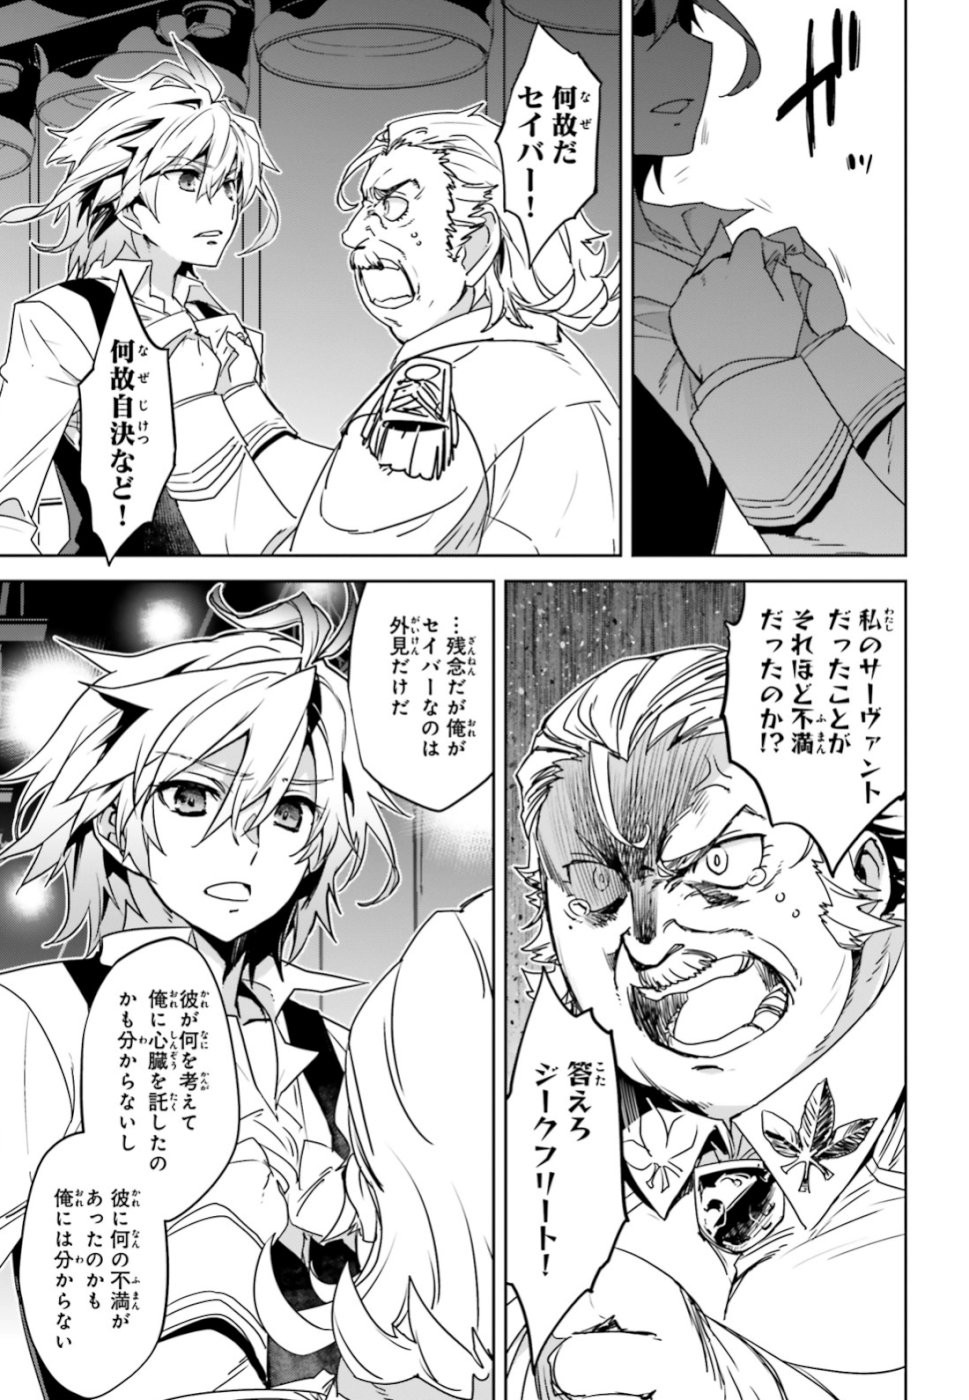 Fate-Apocrypha - Chapter 34 - Page 7